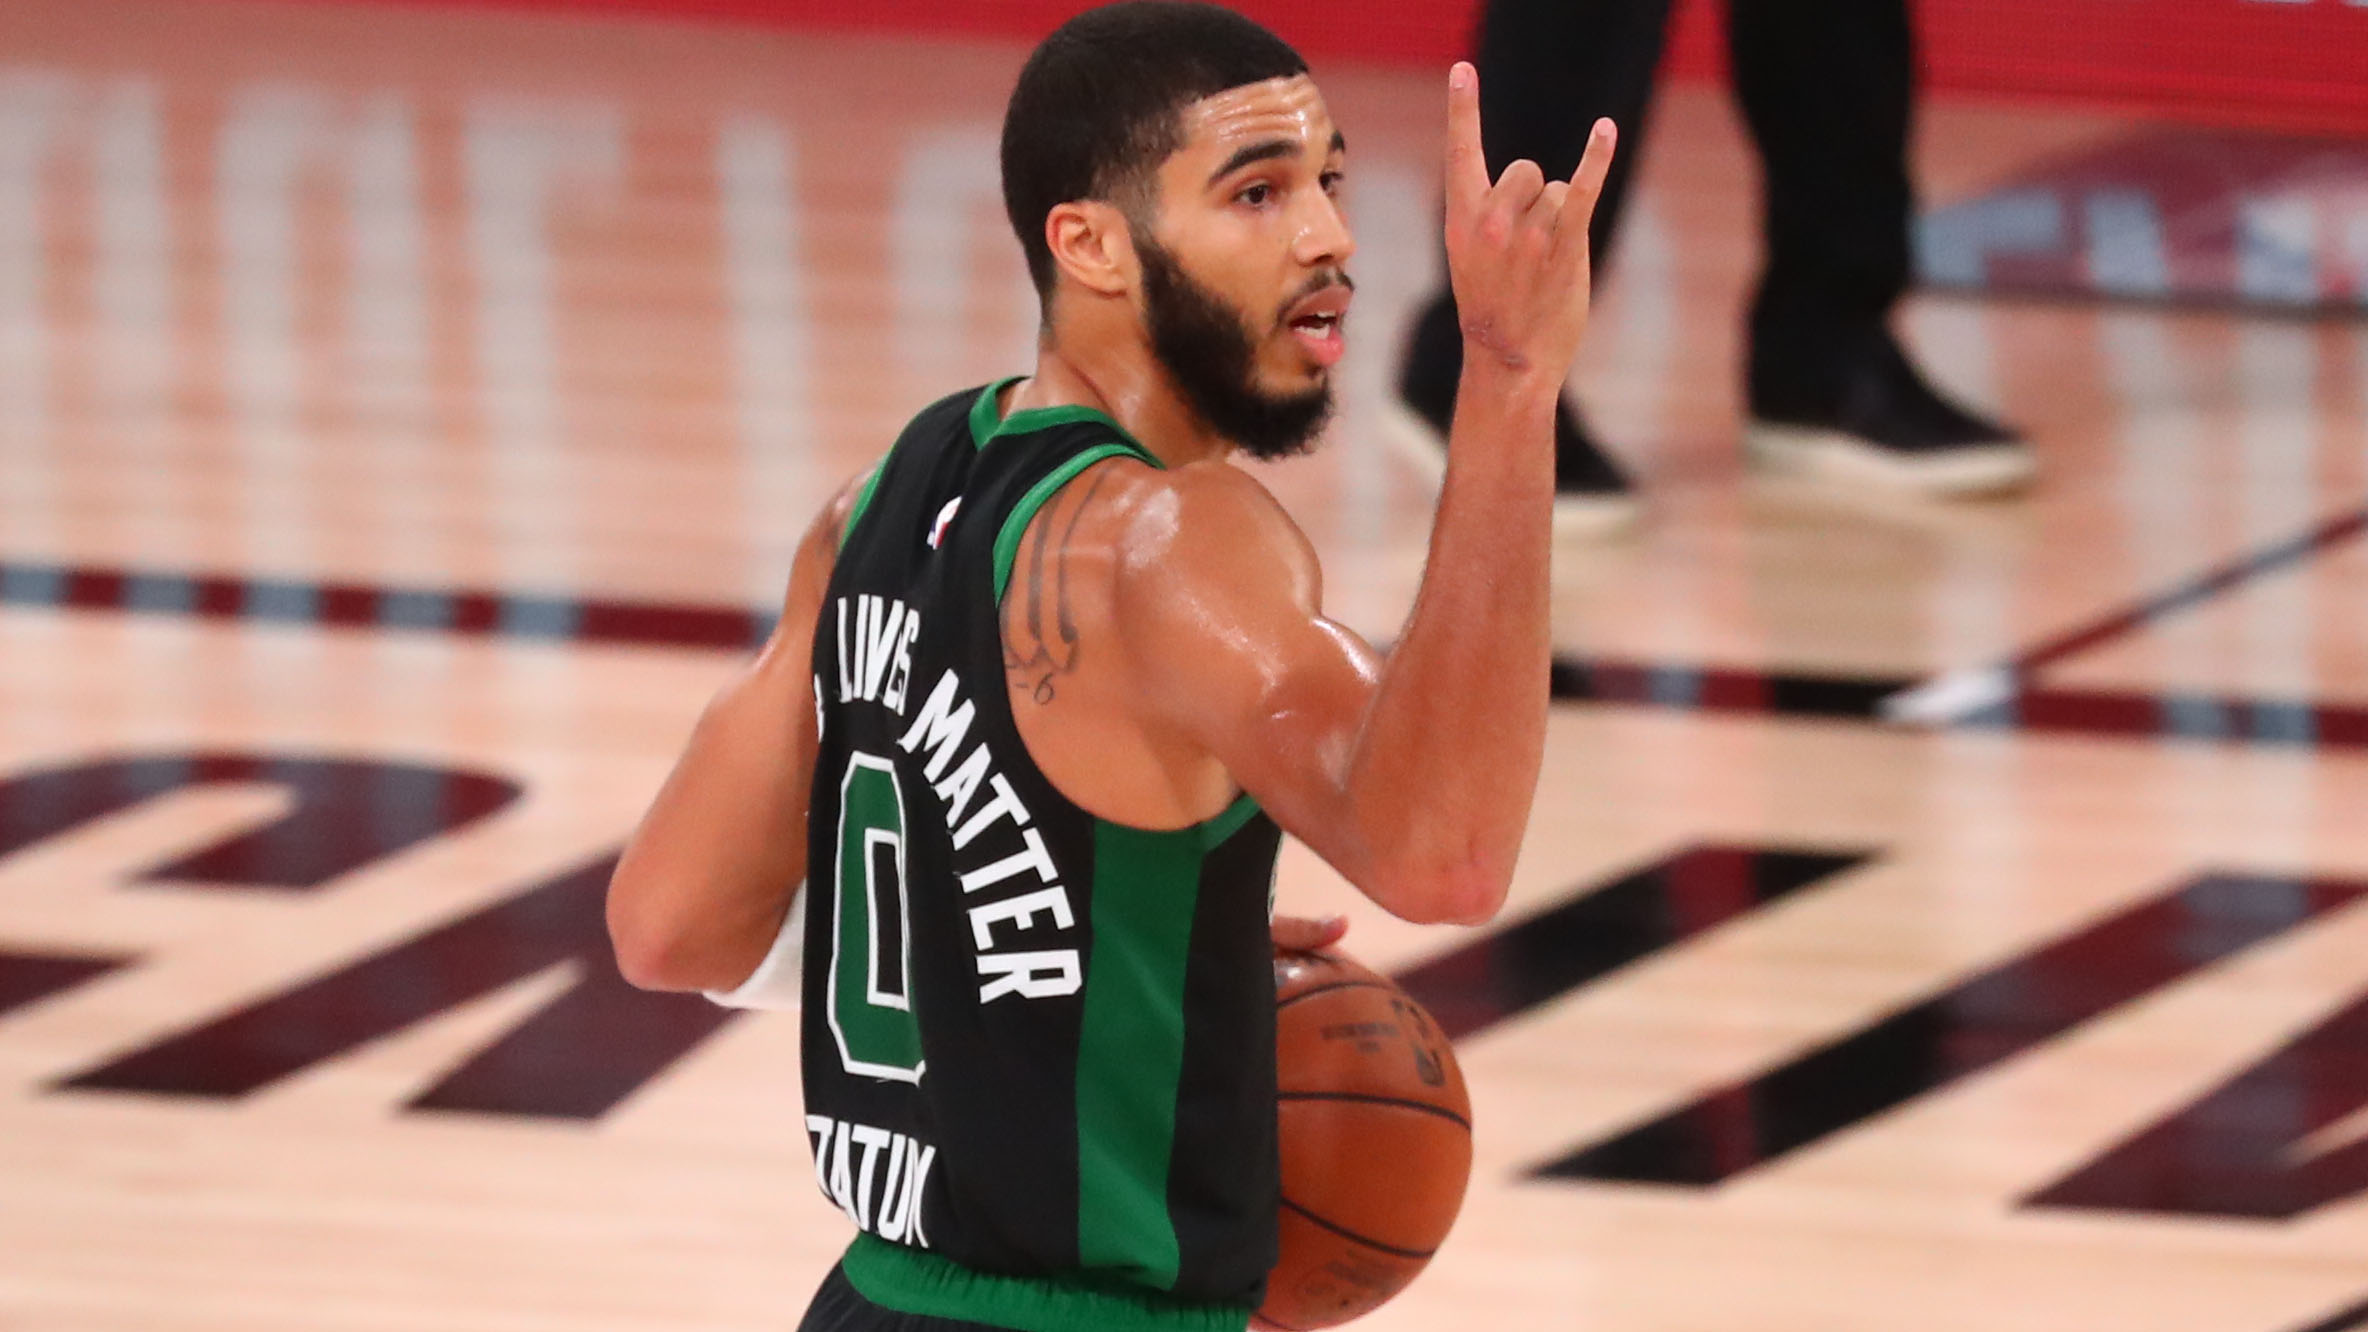 20 Under 25: Ranking the Celtics' candidates, from All-Stars to